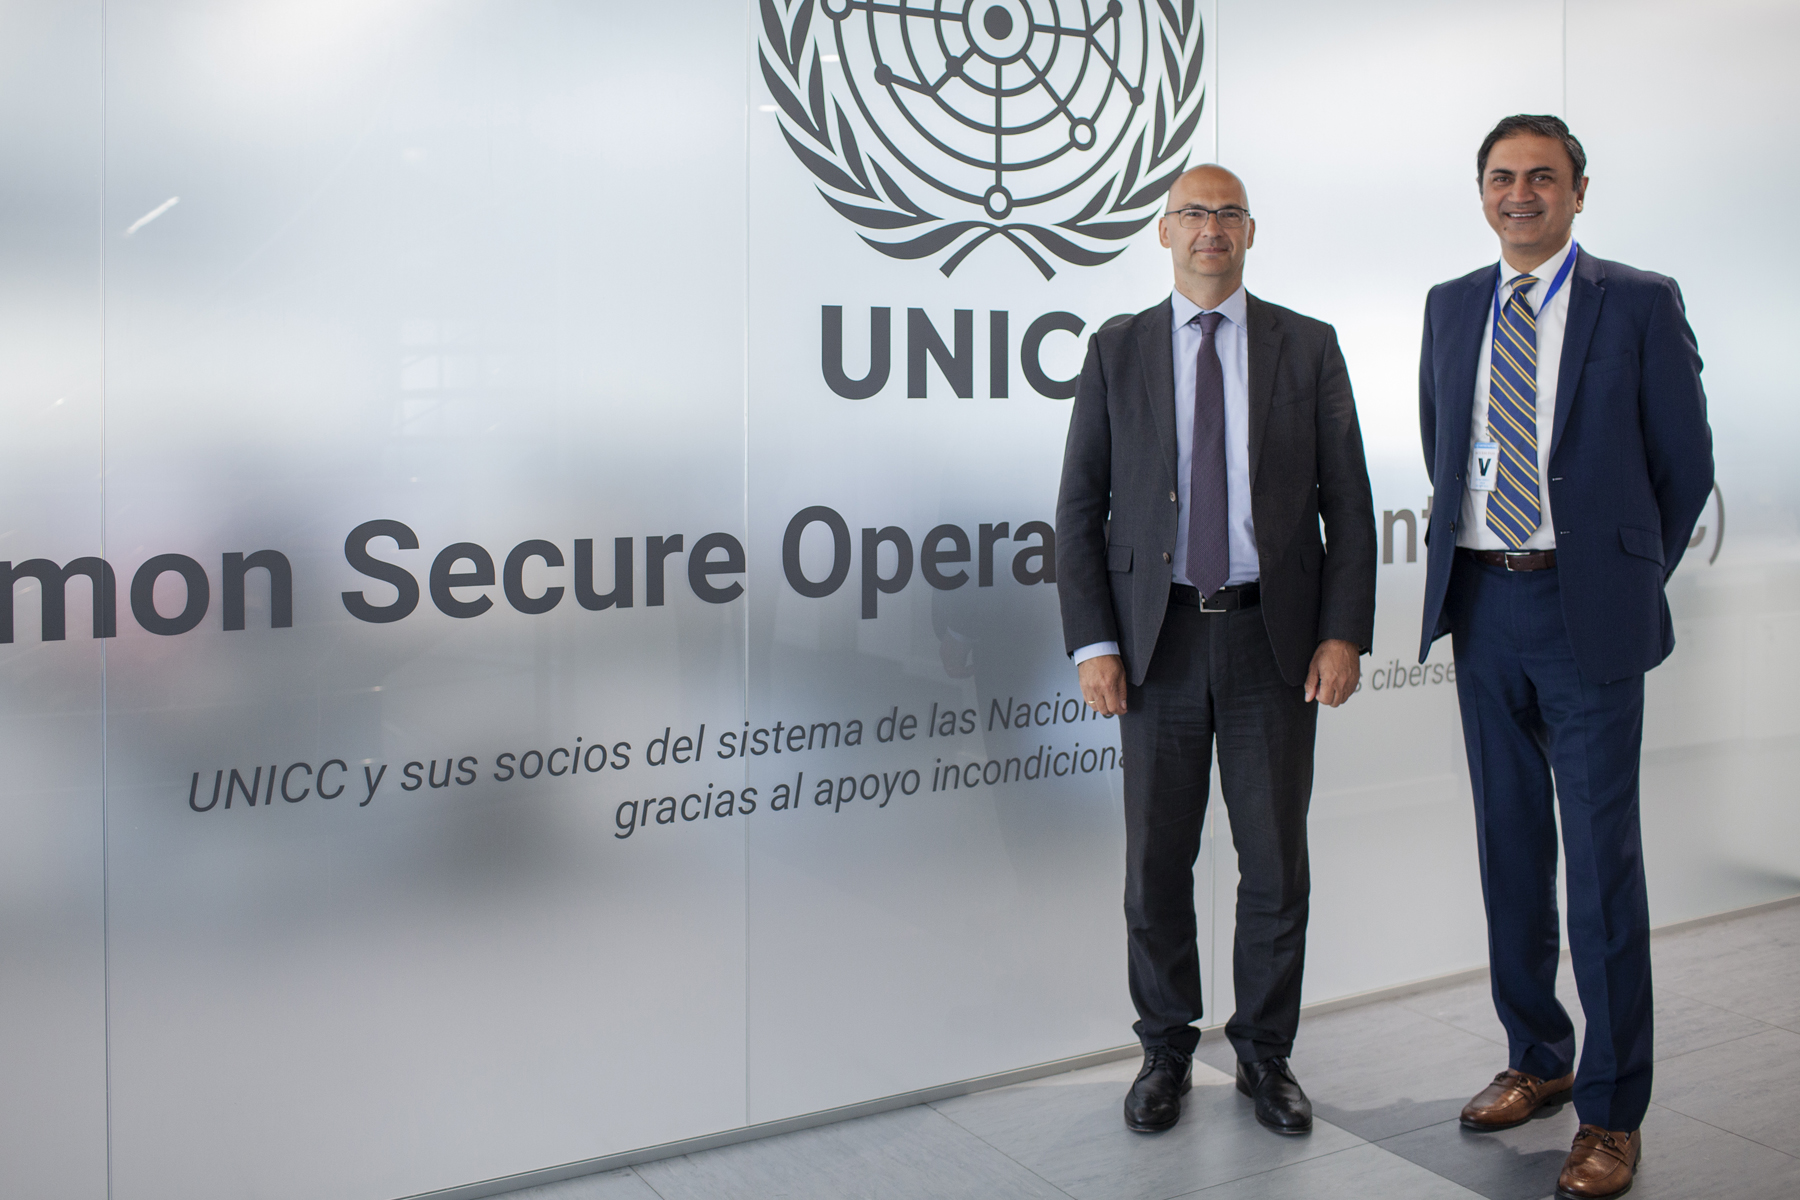 Sameer Chauhan, Director of UNICC and Dejan Jakovjlevic, Director of Digitalization and Informatics Division and Chief Information Officer from FAO at UNICC Cybersecurity Centre of Excellence in Valencia, Spain